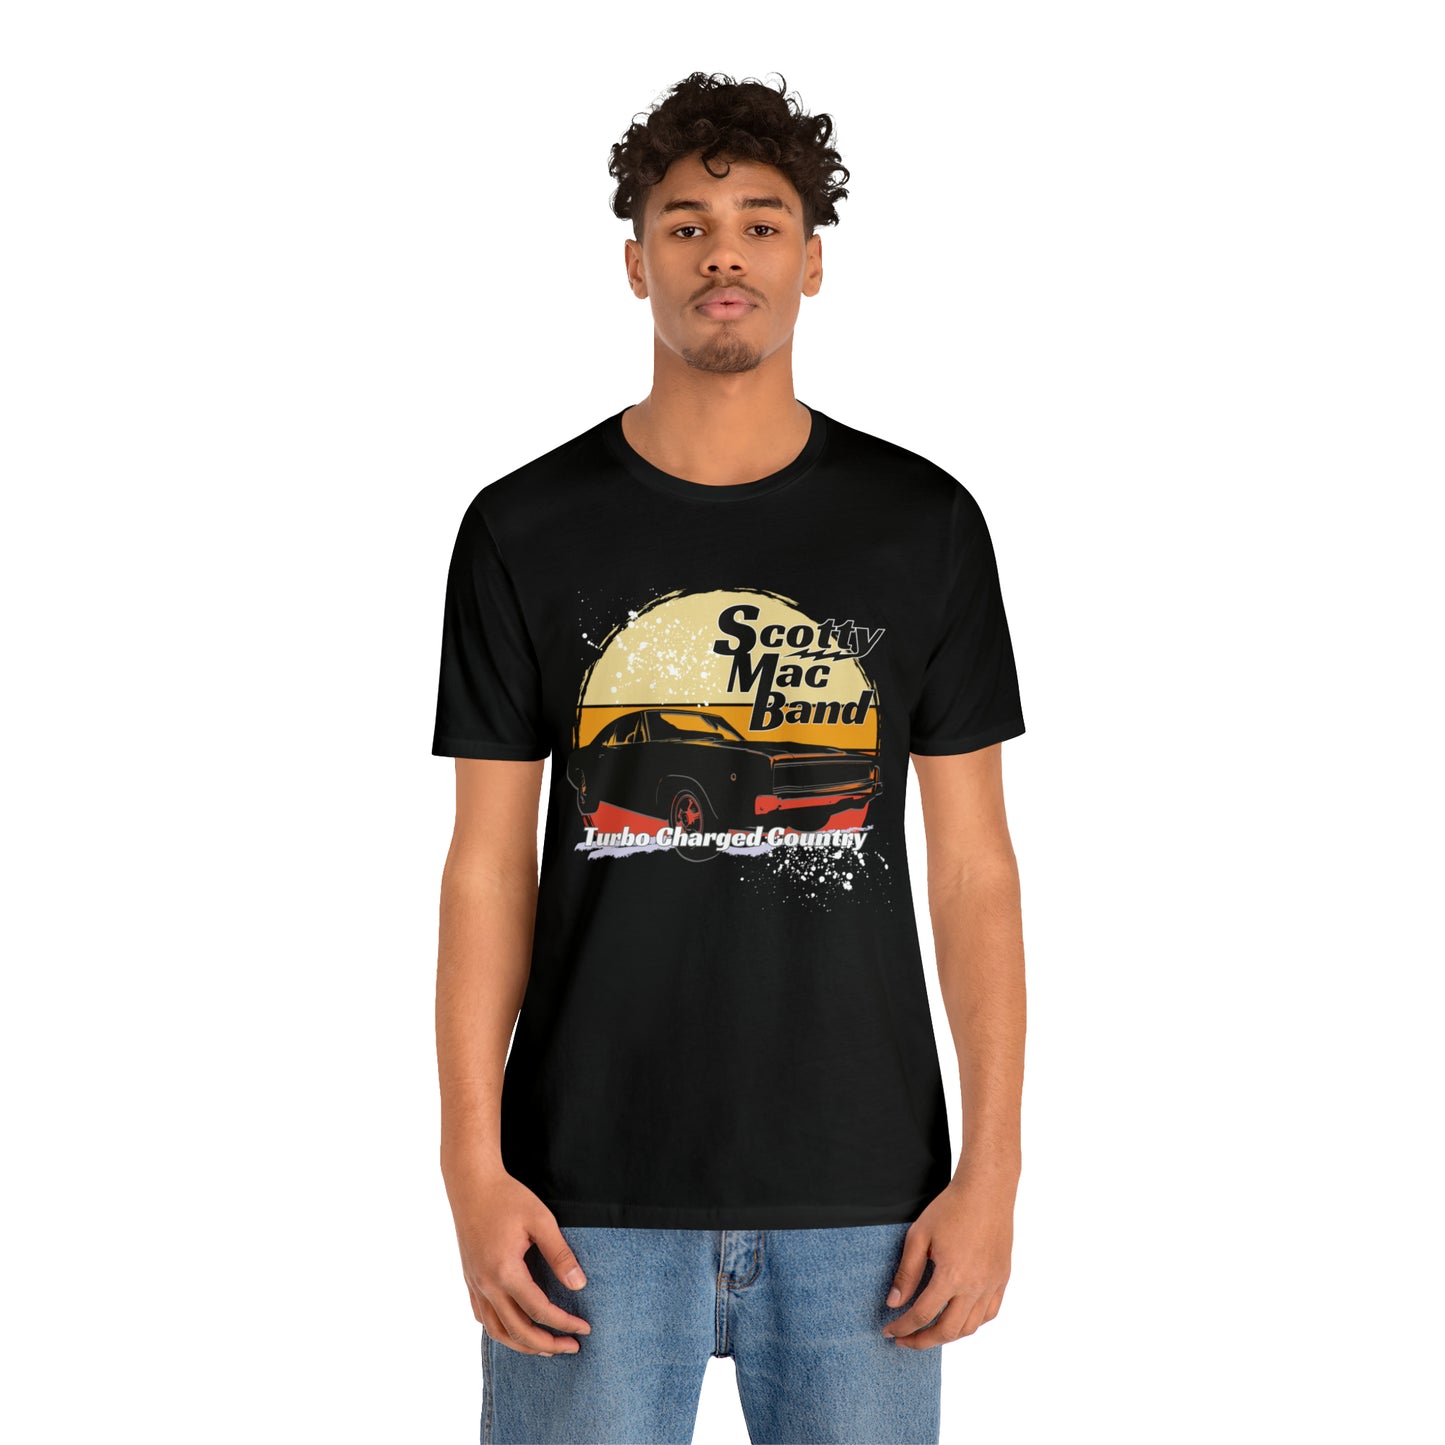 Turbo Charged Country Men's Tee Black